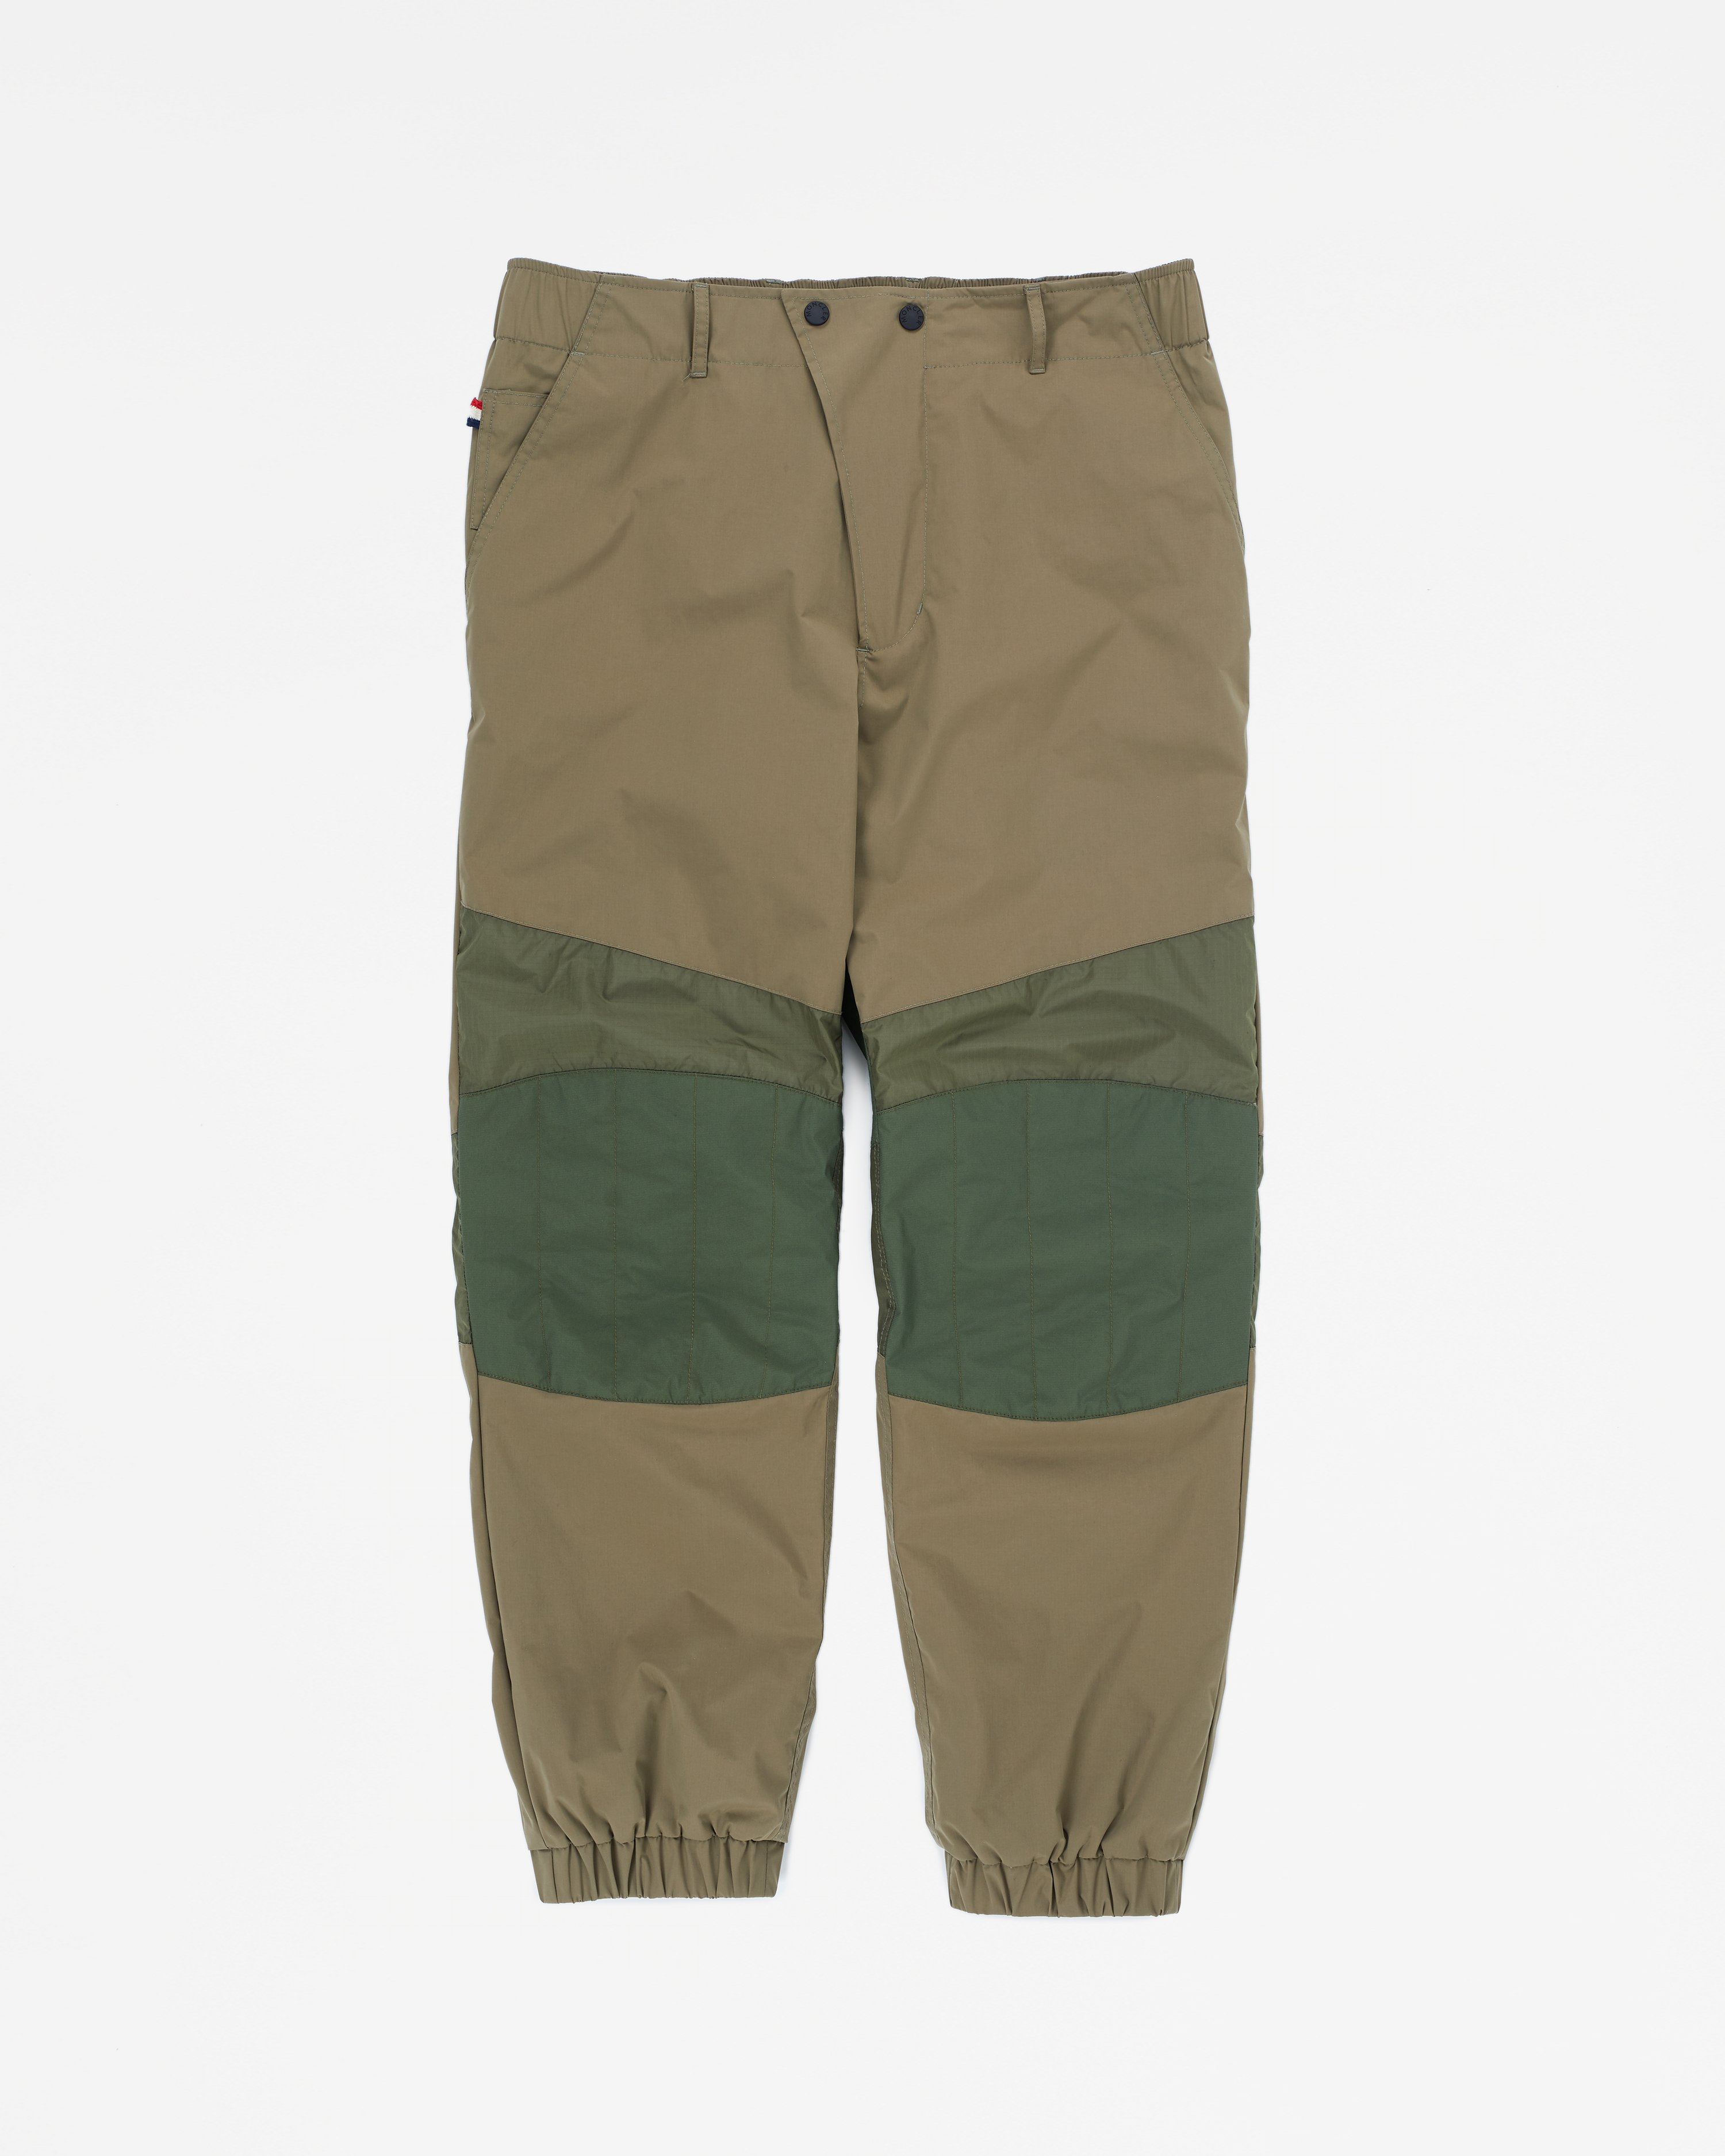 Moncler Genius - Recycled Sports Trousers - Clothing - Green - Image 1